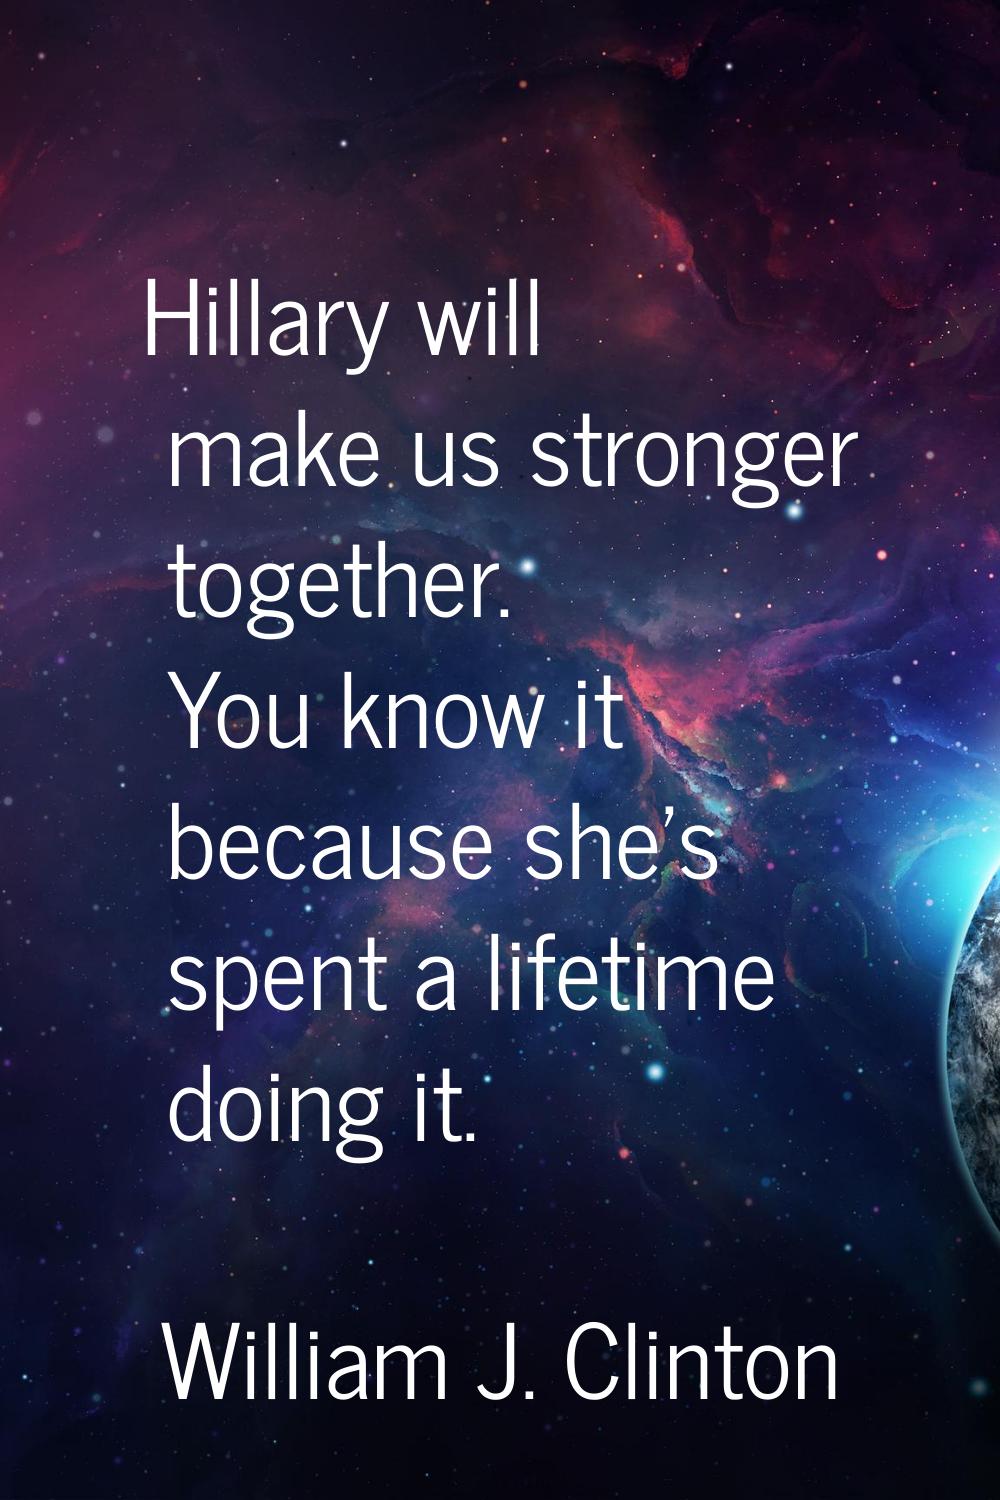 Hillary will make us stronger together. You know it because she's spent a lifetime doing it.